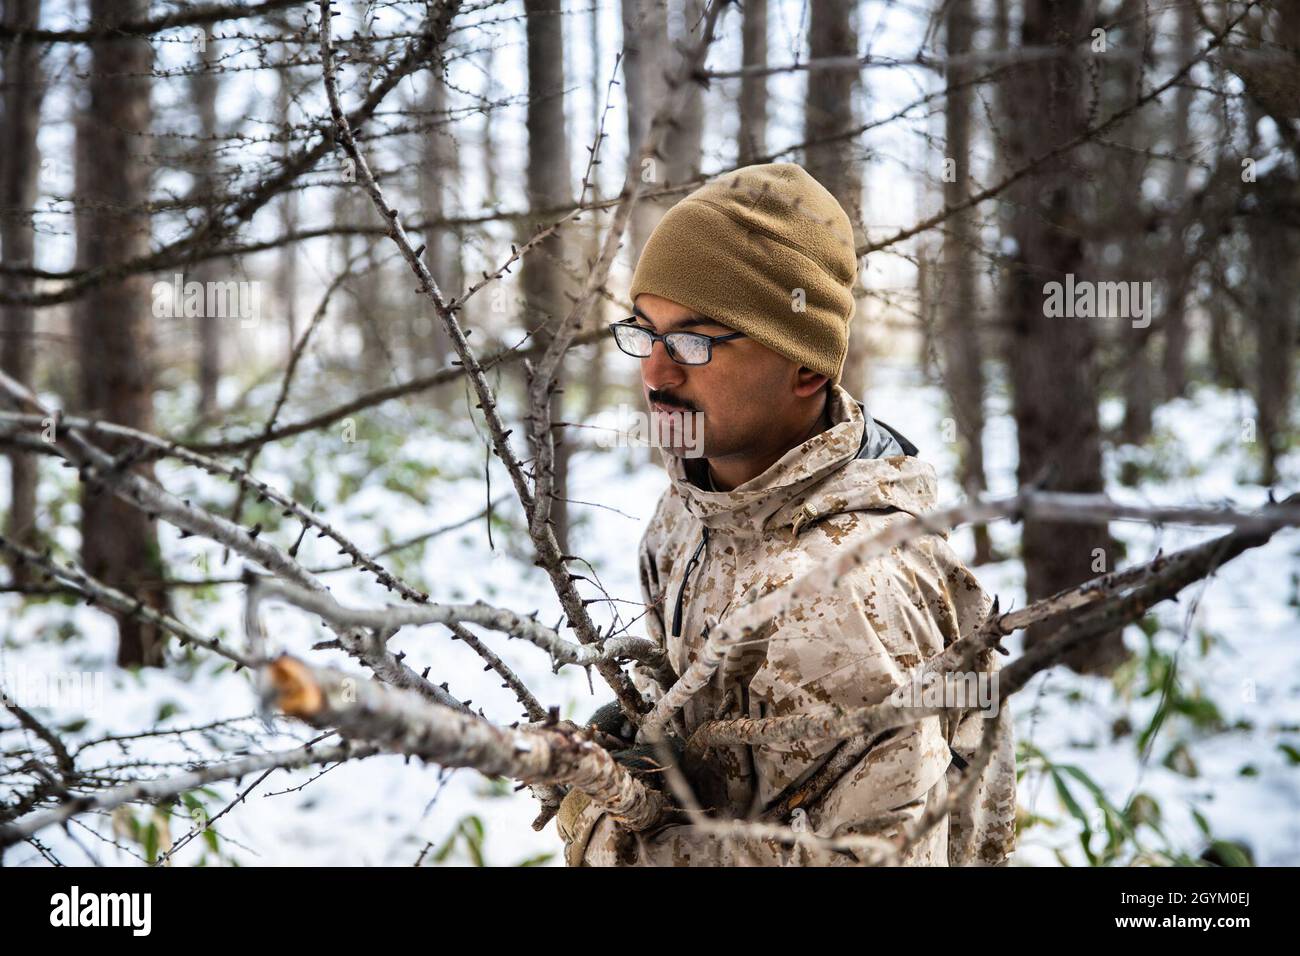 U.S. Marine Corps Lance Cpl. Albert Medina carries sticks and branches for an outdoor shelter during exercise Northern Viper on Yausubetsu Training Area, Hokkaido, Japan, Jan. 24, 2020. Personnel currently assigned to the Logistics Combat Element for exercise Northern Viper prepare for upcoming operations. Northern Viper is a regularly scheduled training exercise that is designed to enhance the interoperability of the U.S. and Japan Alliance by allowing Marine Air-Ground Task Forces from III Marine Expeditionary Force to maintain their lethality and proficiency in MAGTF Combined Arms Operation Stock Photo